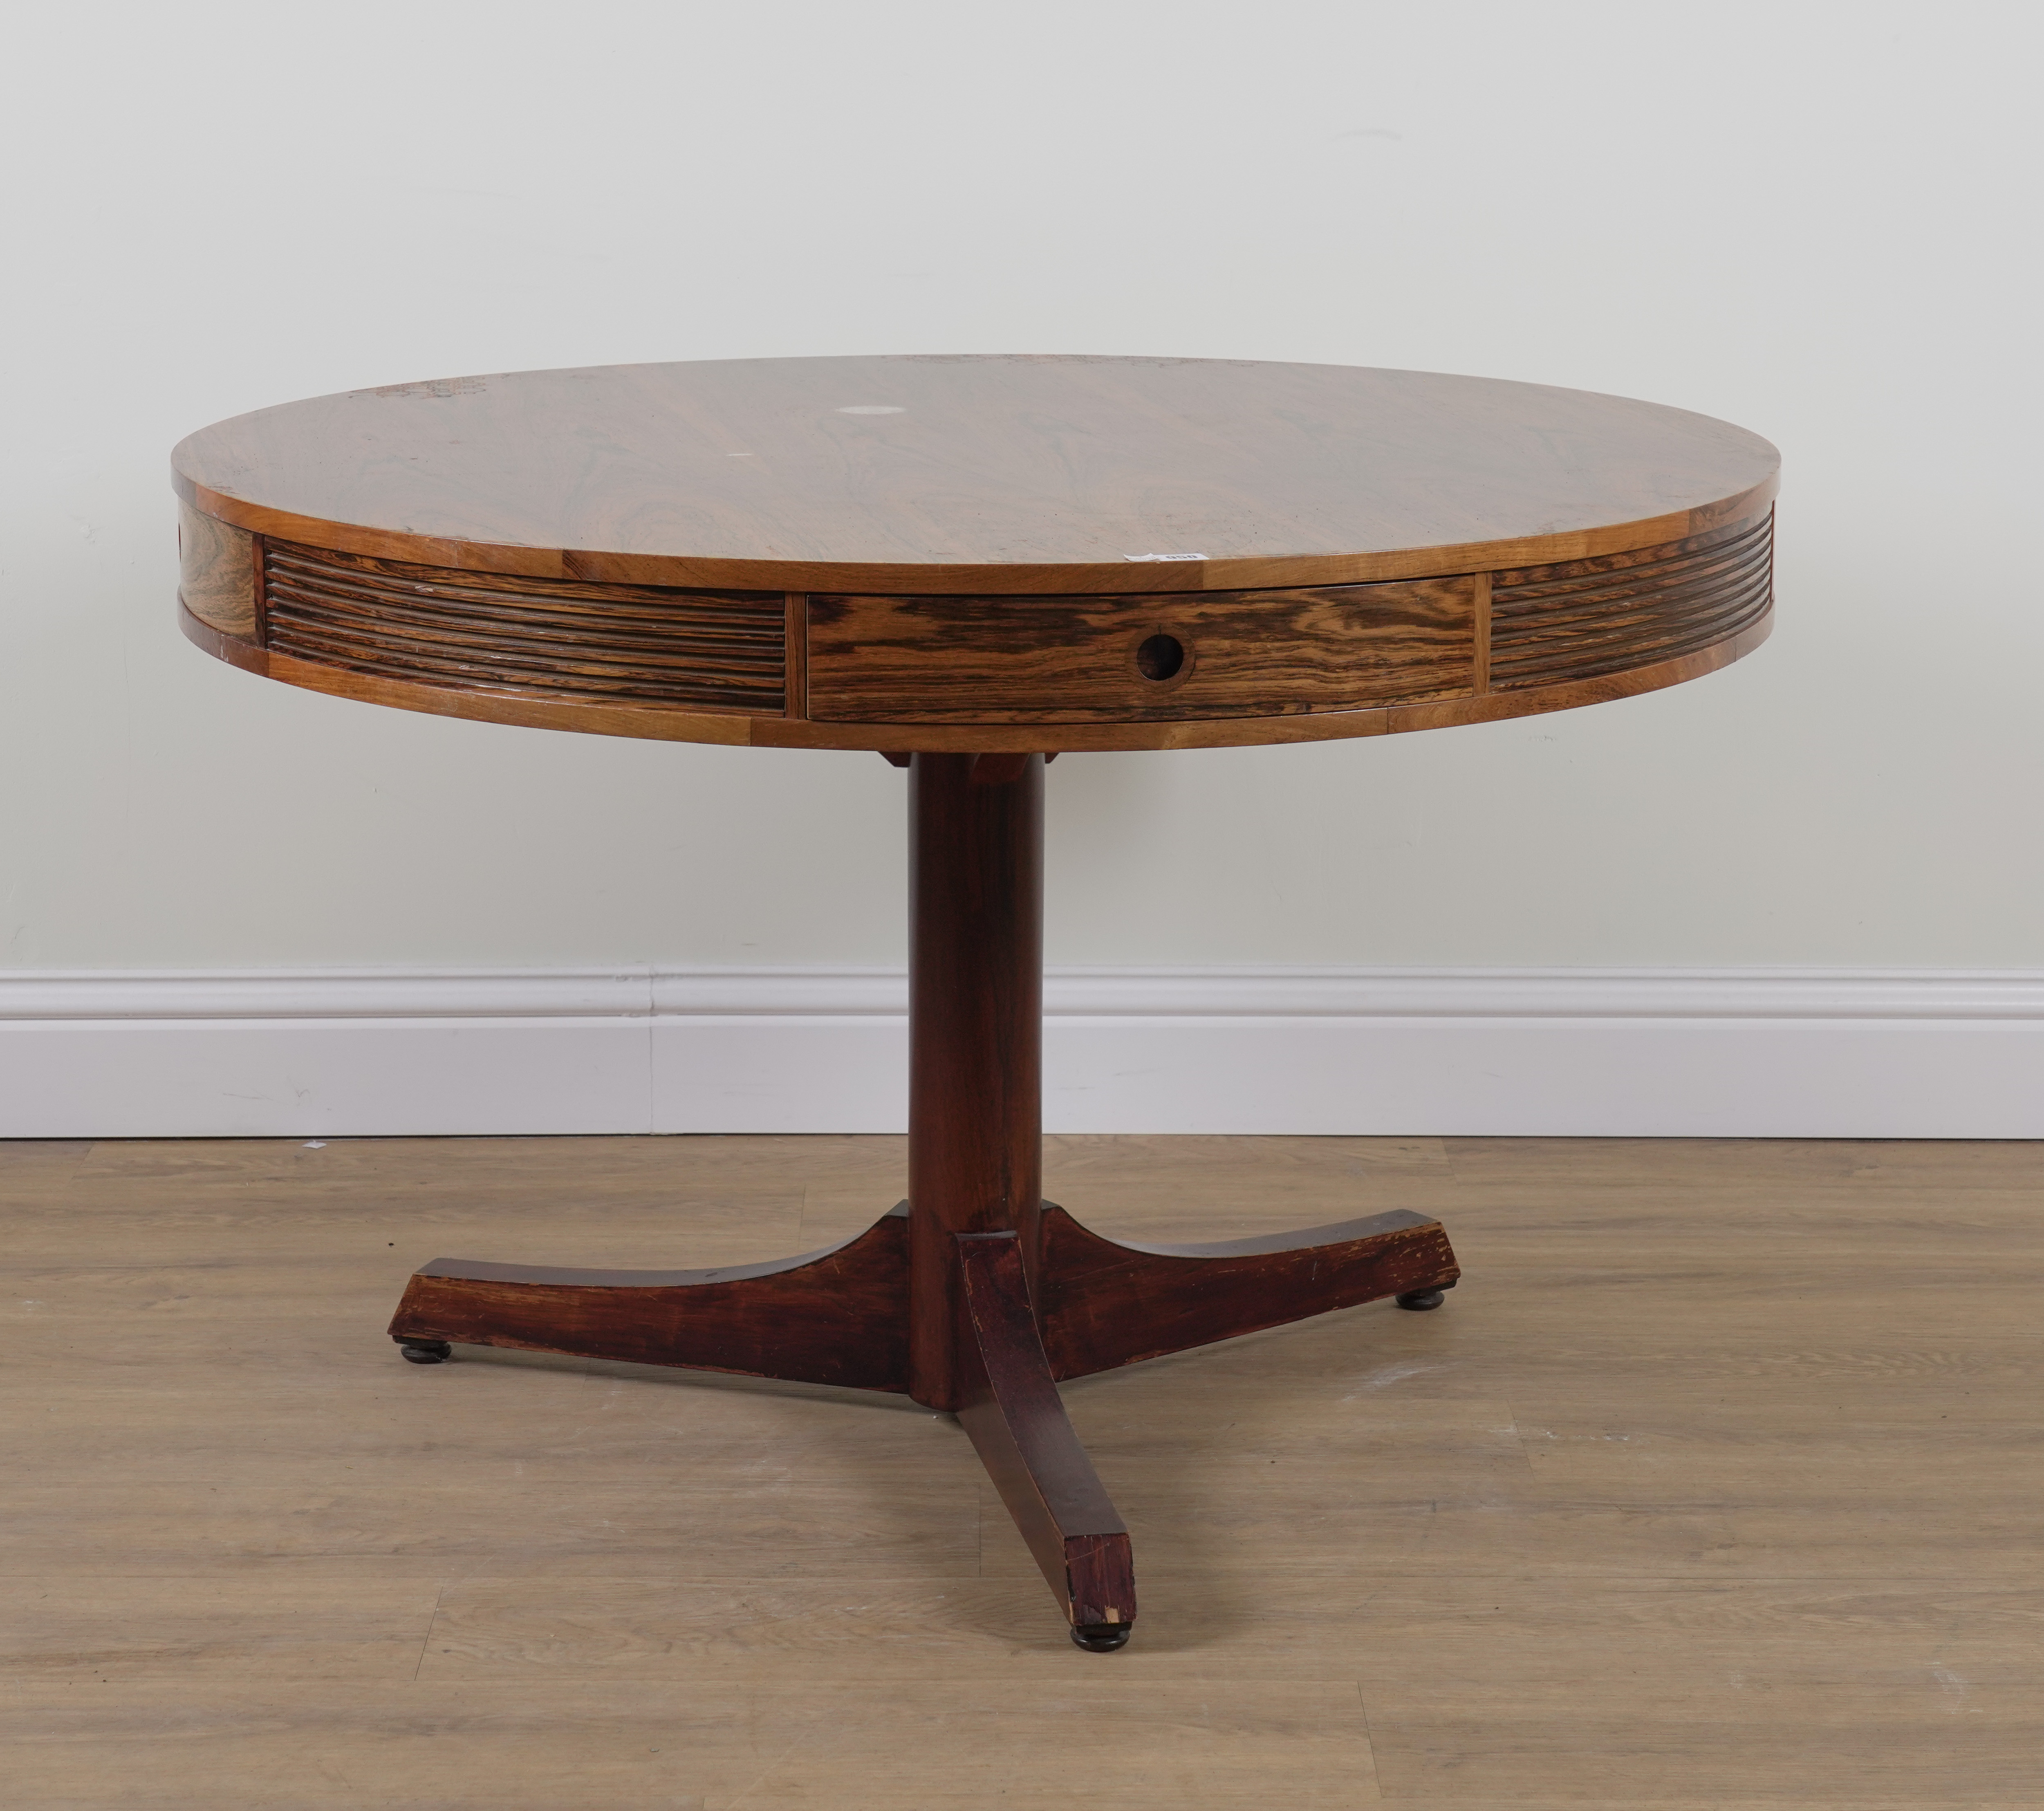 PROBABLY ARCHIE SHINE FOR HEALS FURNITURE; A MID-20TH CENTURY ROSEWOOD CIRCULAR DINING TABLE - Image 9 of 11